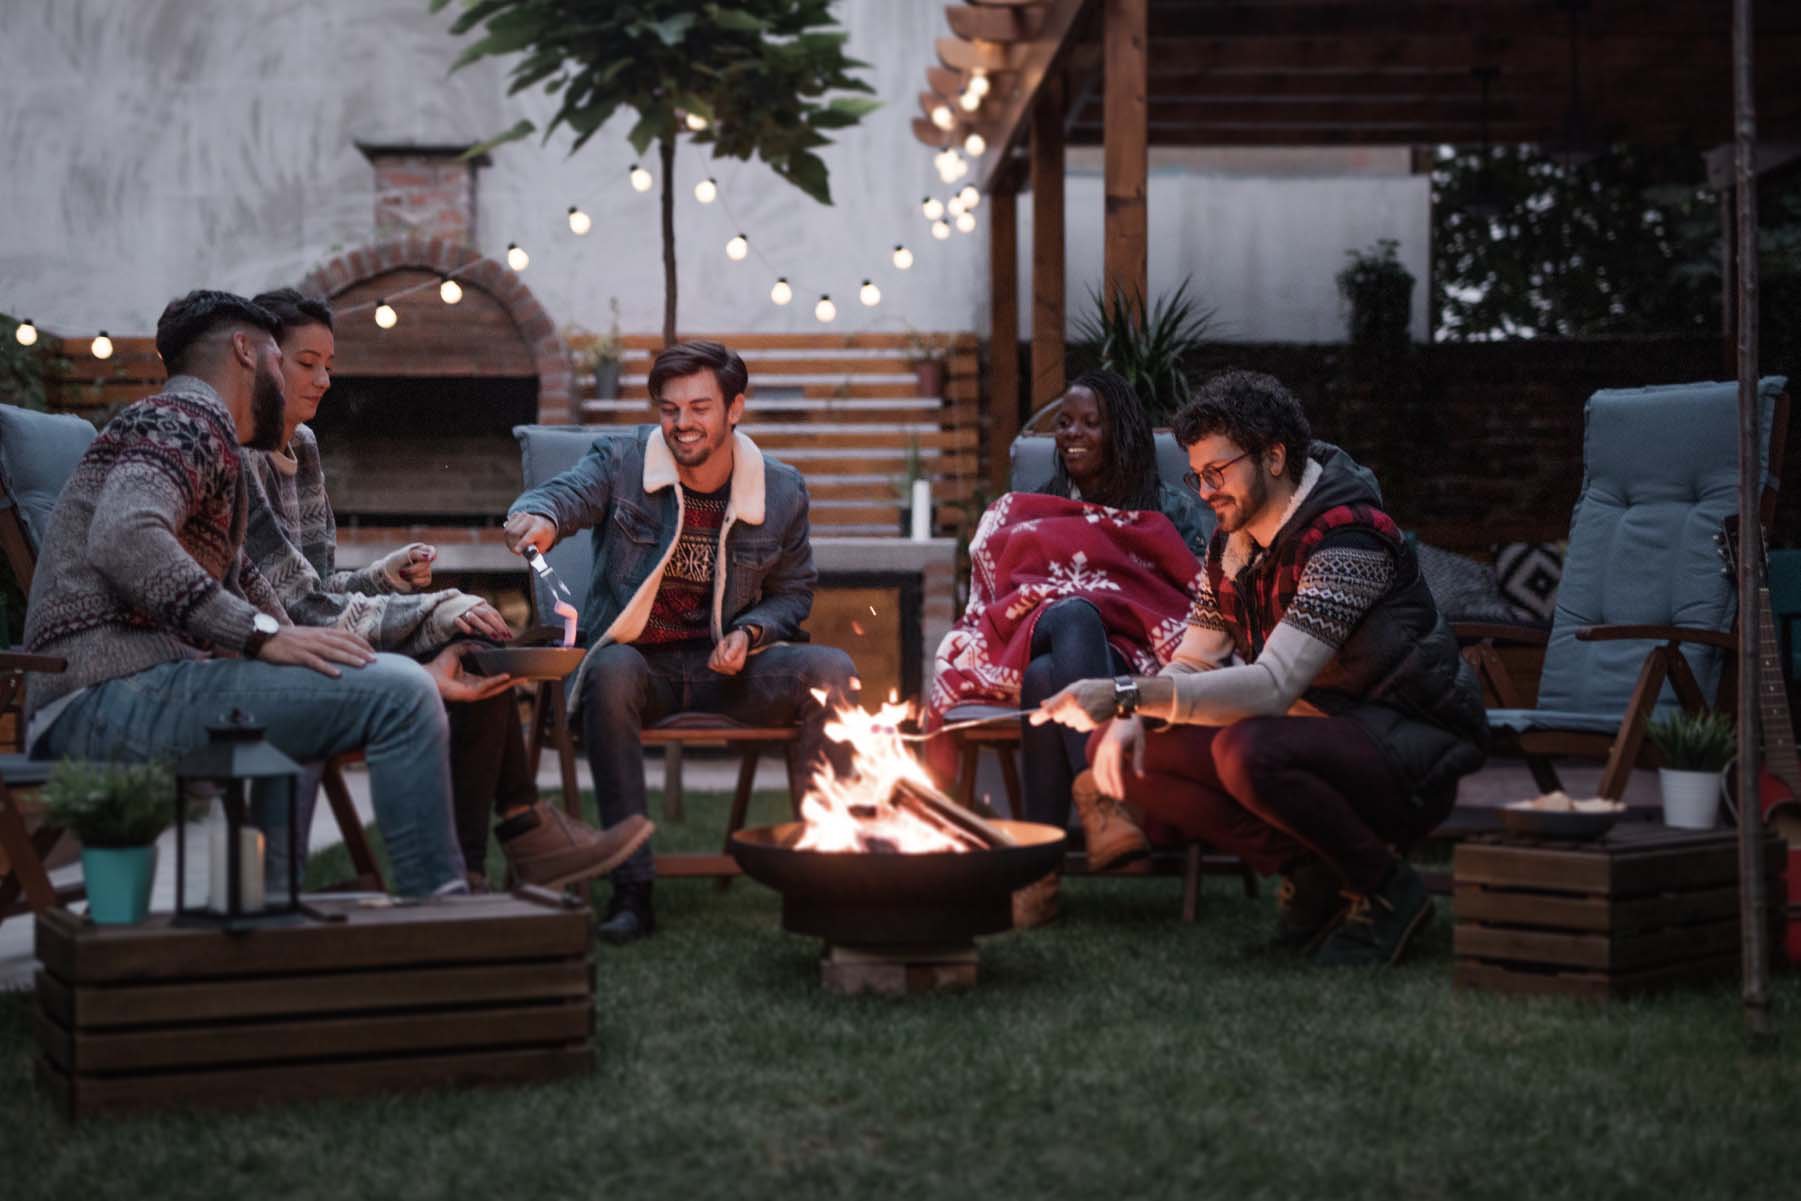 How to put out a fire pit Nine tips to enjoy yours safely